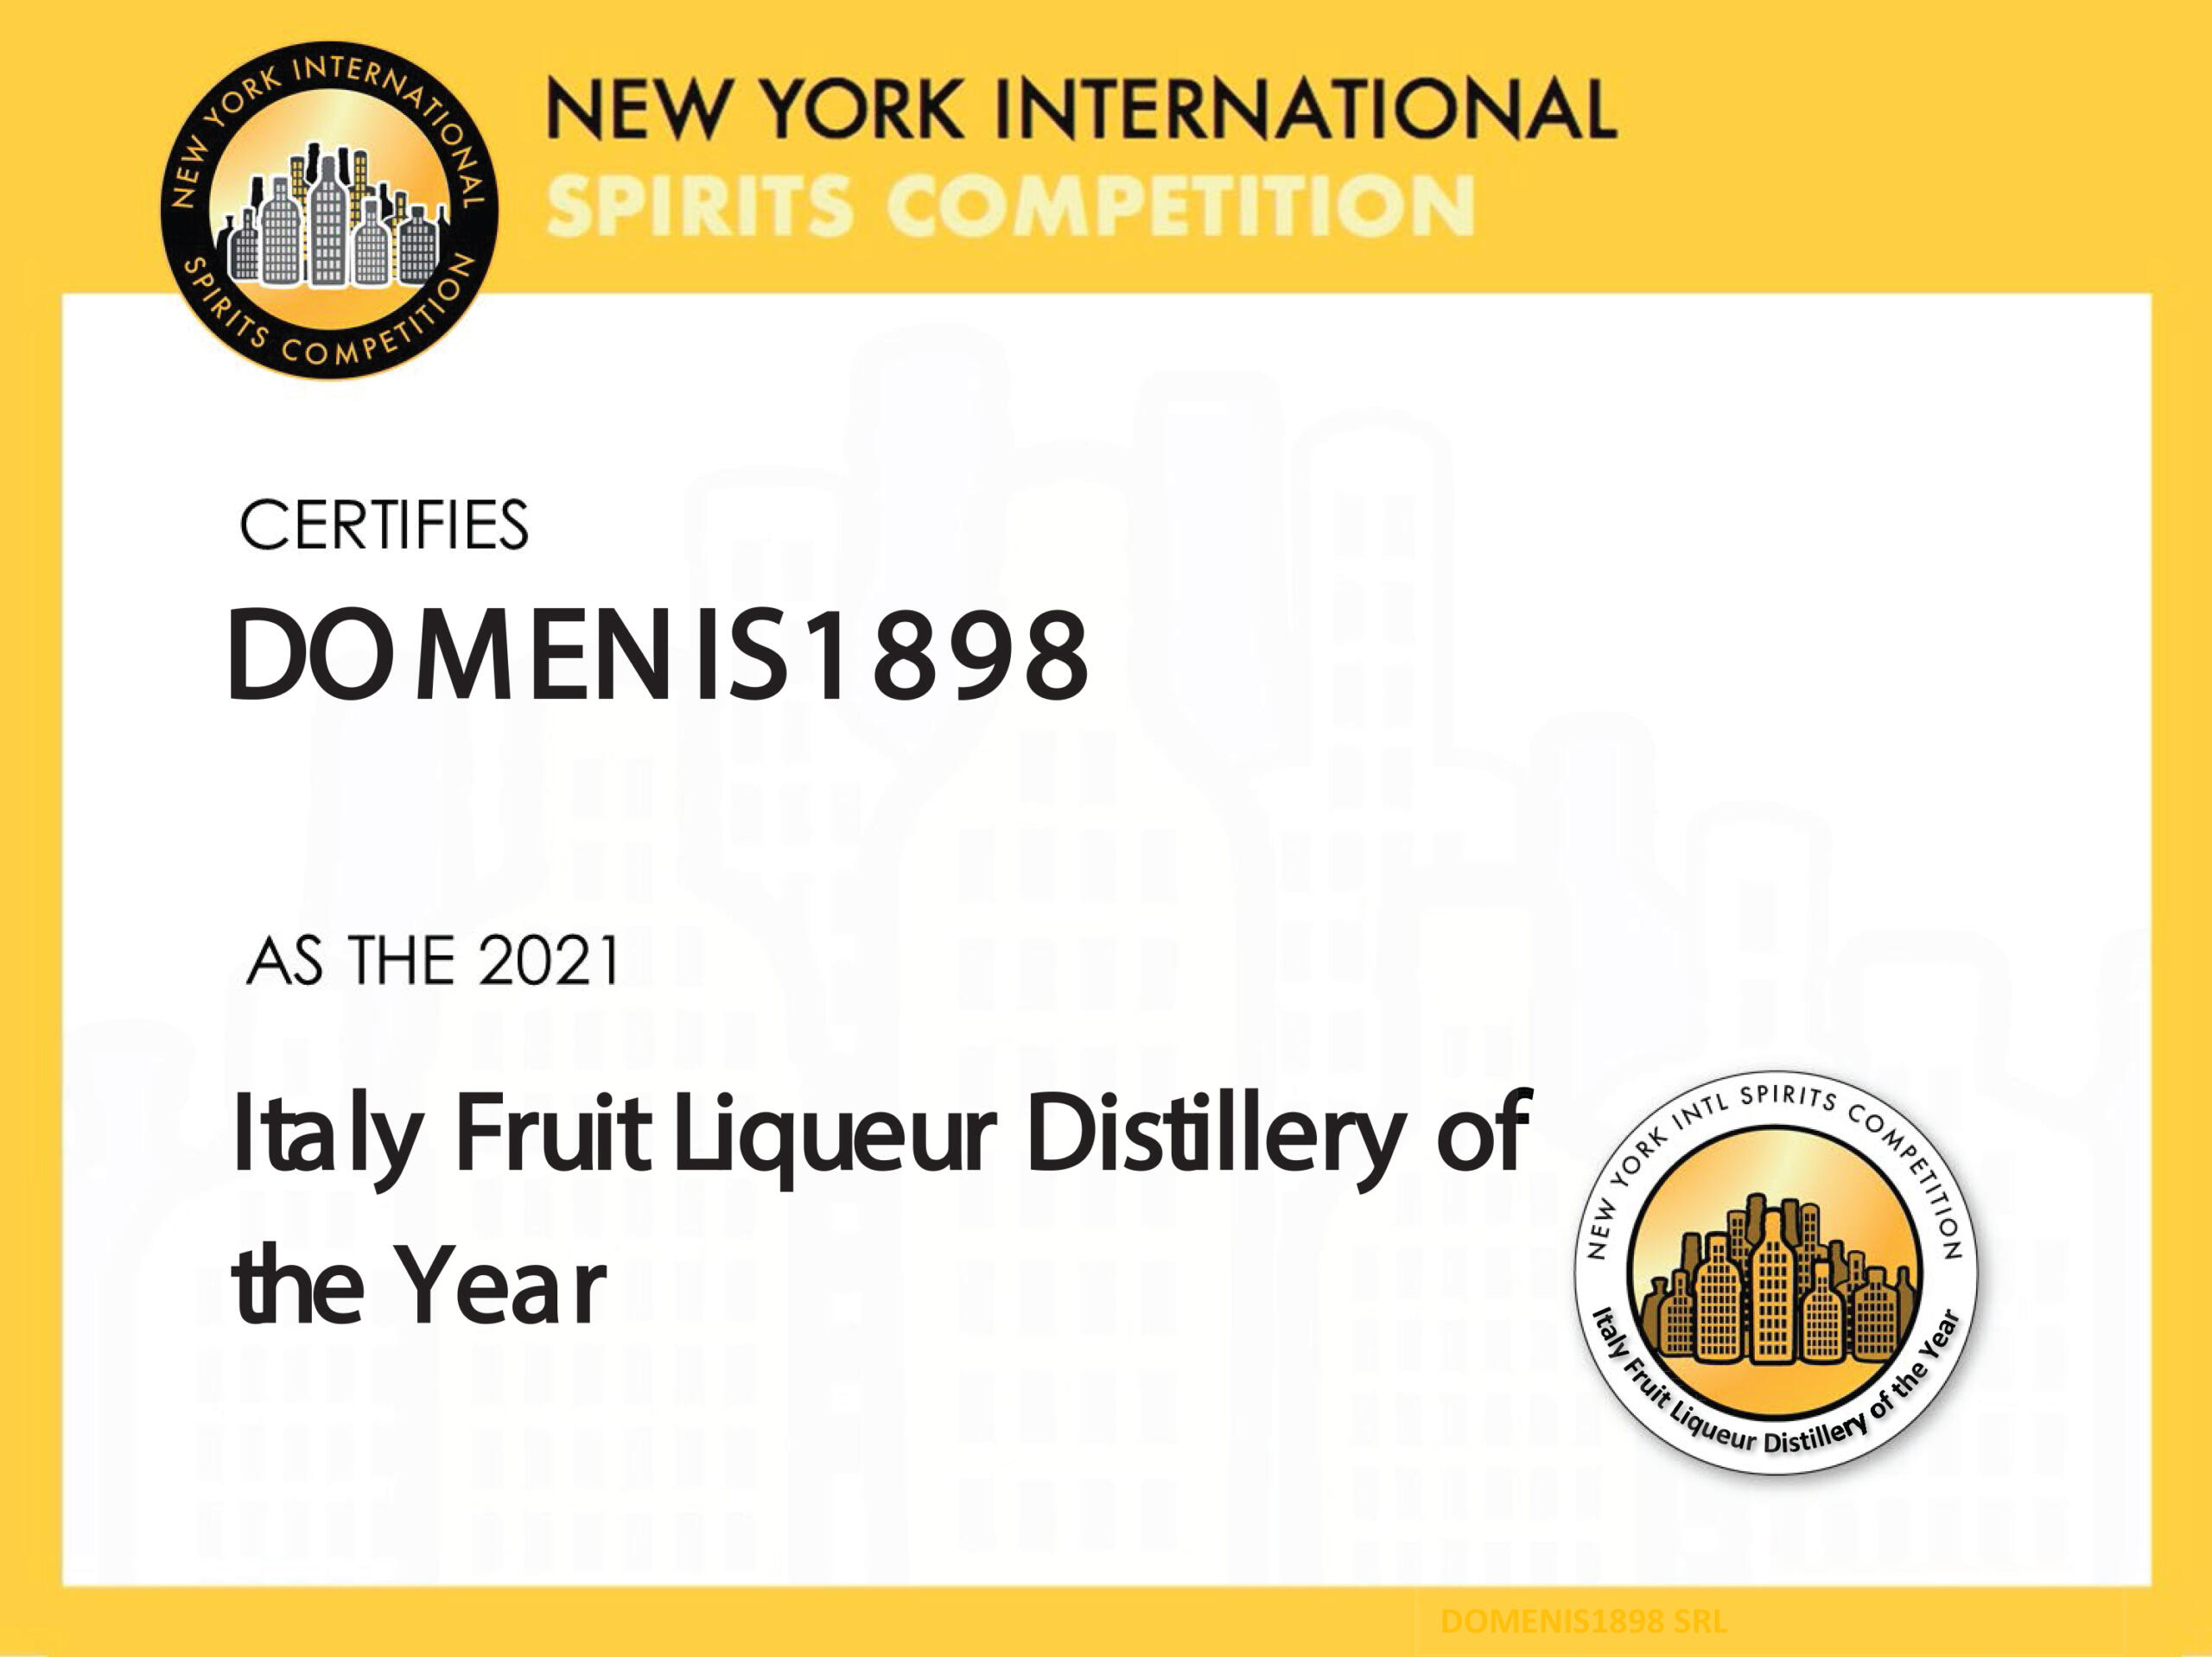 New York Intl Spirits Competition 2021 – Italy Fruit Liqueur Distillery of the Year